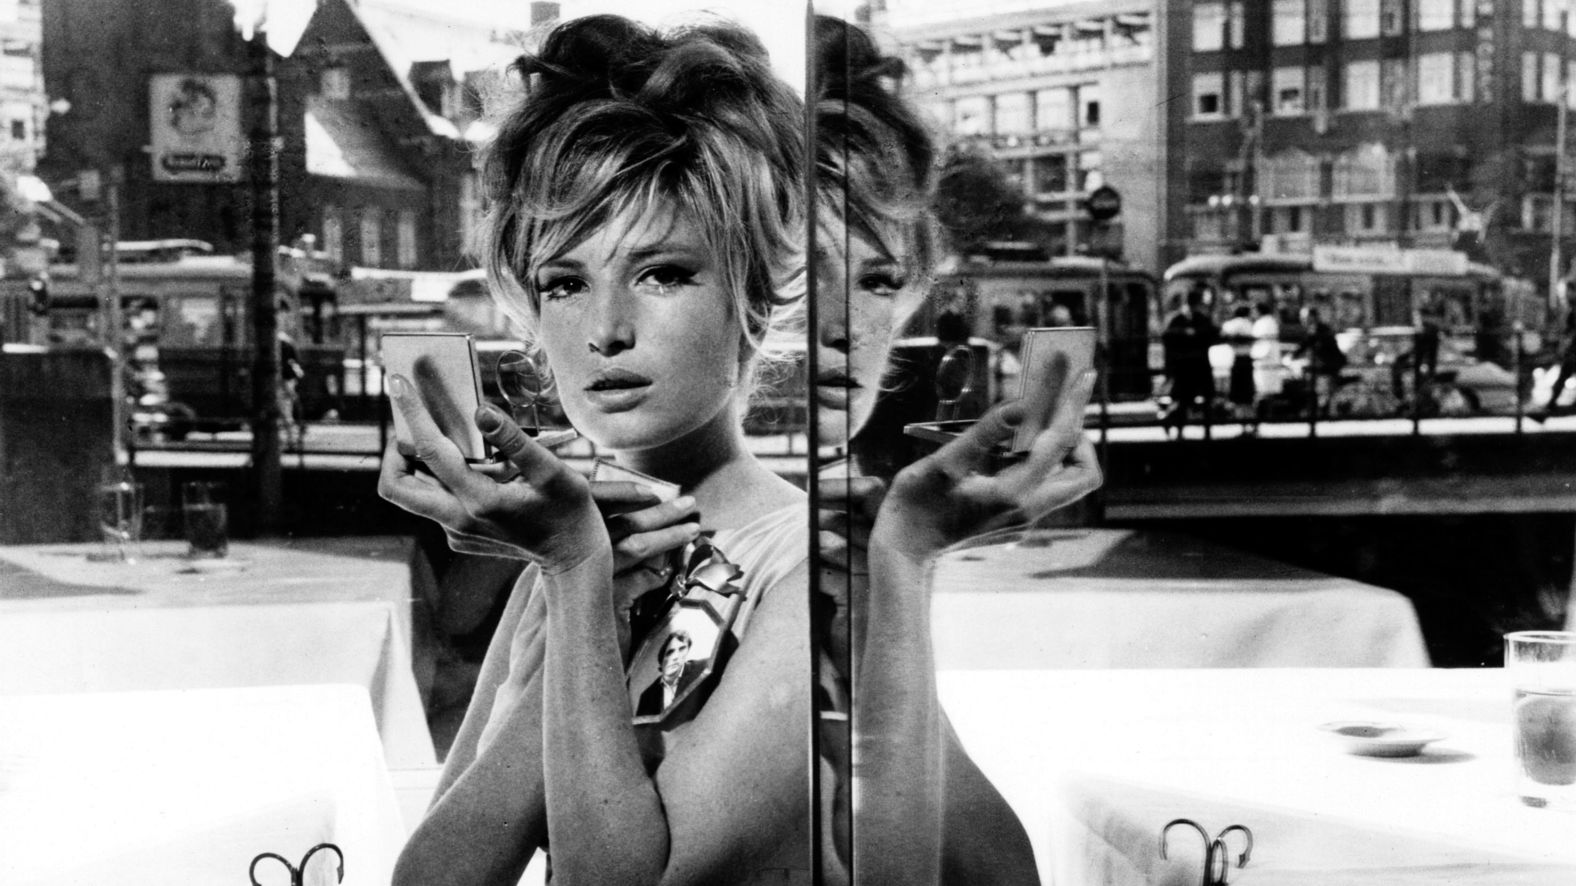 Italian cinema star <a href="index.php?page=&url=http%3A%2F%2Fwww.cnn.com%2Fstyle%2Farticle%2Fmonica-vitti-death-intl-scli%2Findex.html" target="_blank">Monica Vitti</a> died February 2 at the age of 90, according to Italian politician and family friend Walter Veltroni. Vitti was well-known for her work with some of Italy and Europe's most influential filmmakers throughout the 1960s and 1970s.